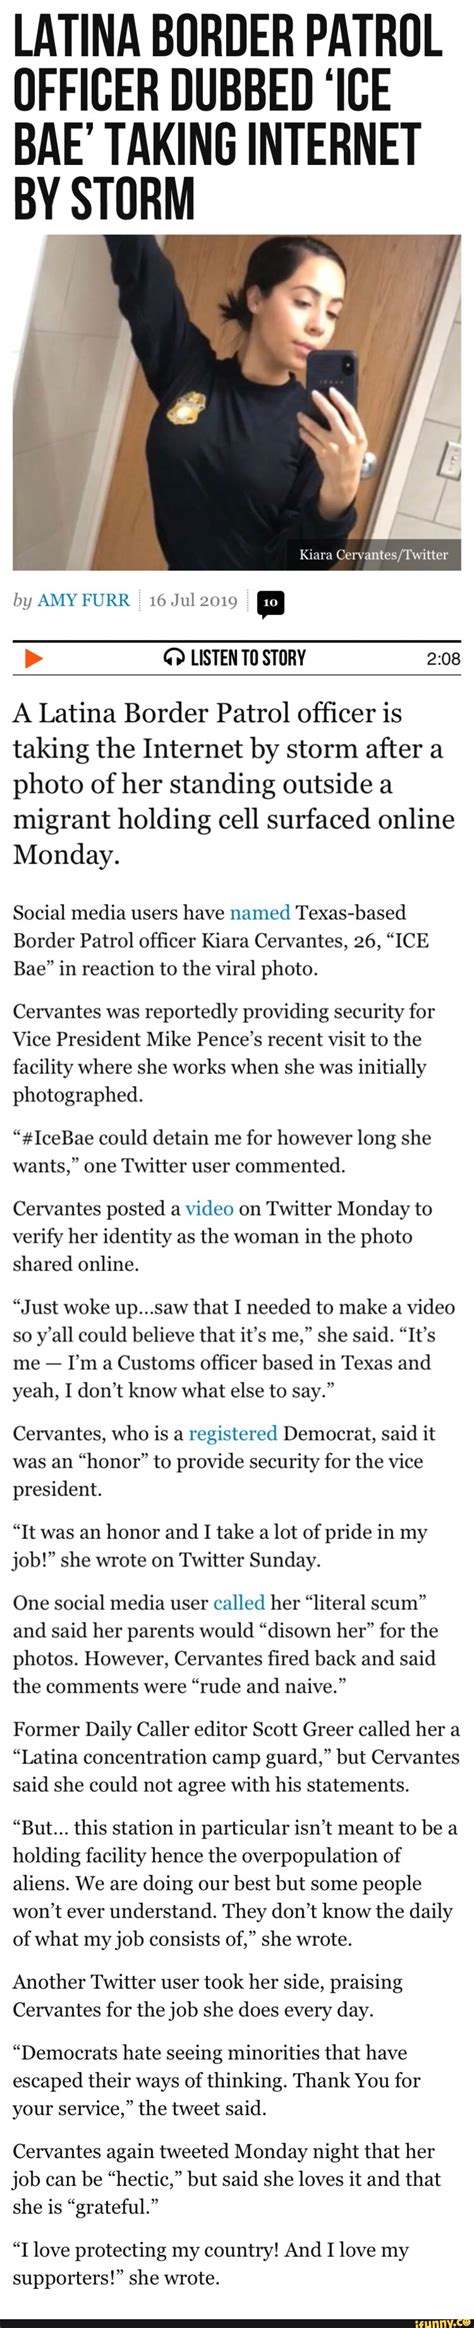 Latina Border Patrol Officer Dubbed “ice Bae’ Taking Internet By Storm O Listen T0 Story 2 08